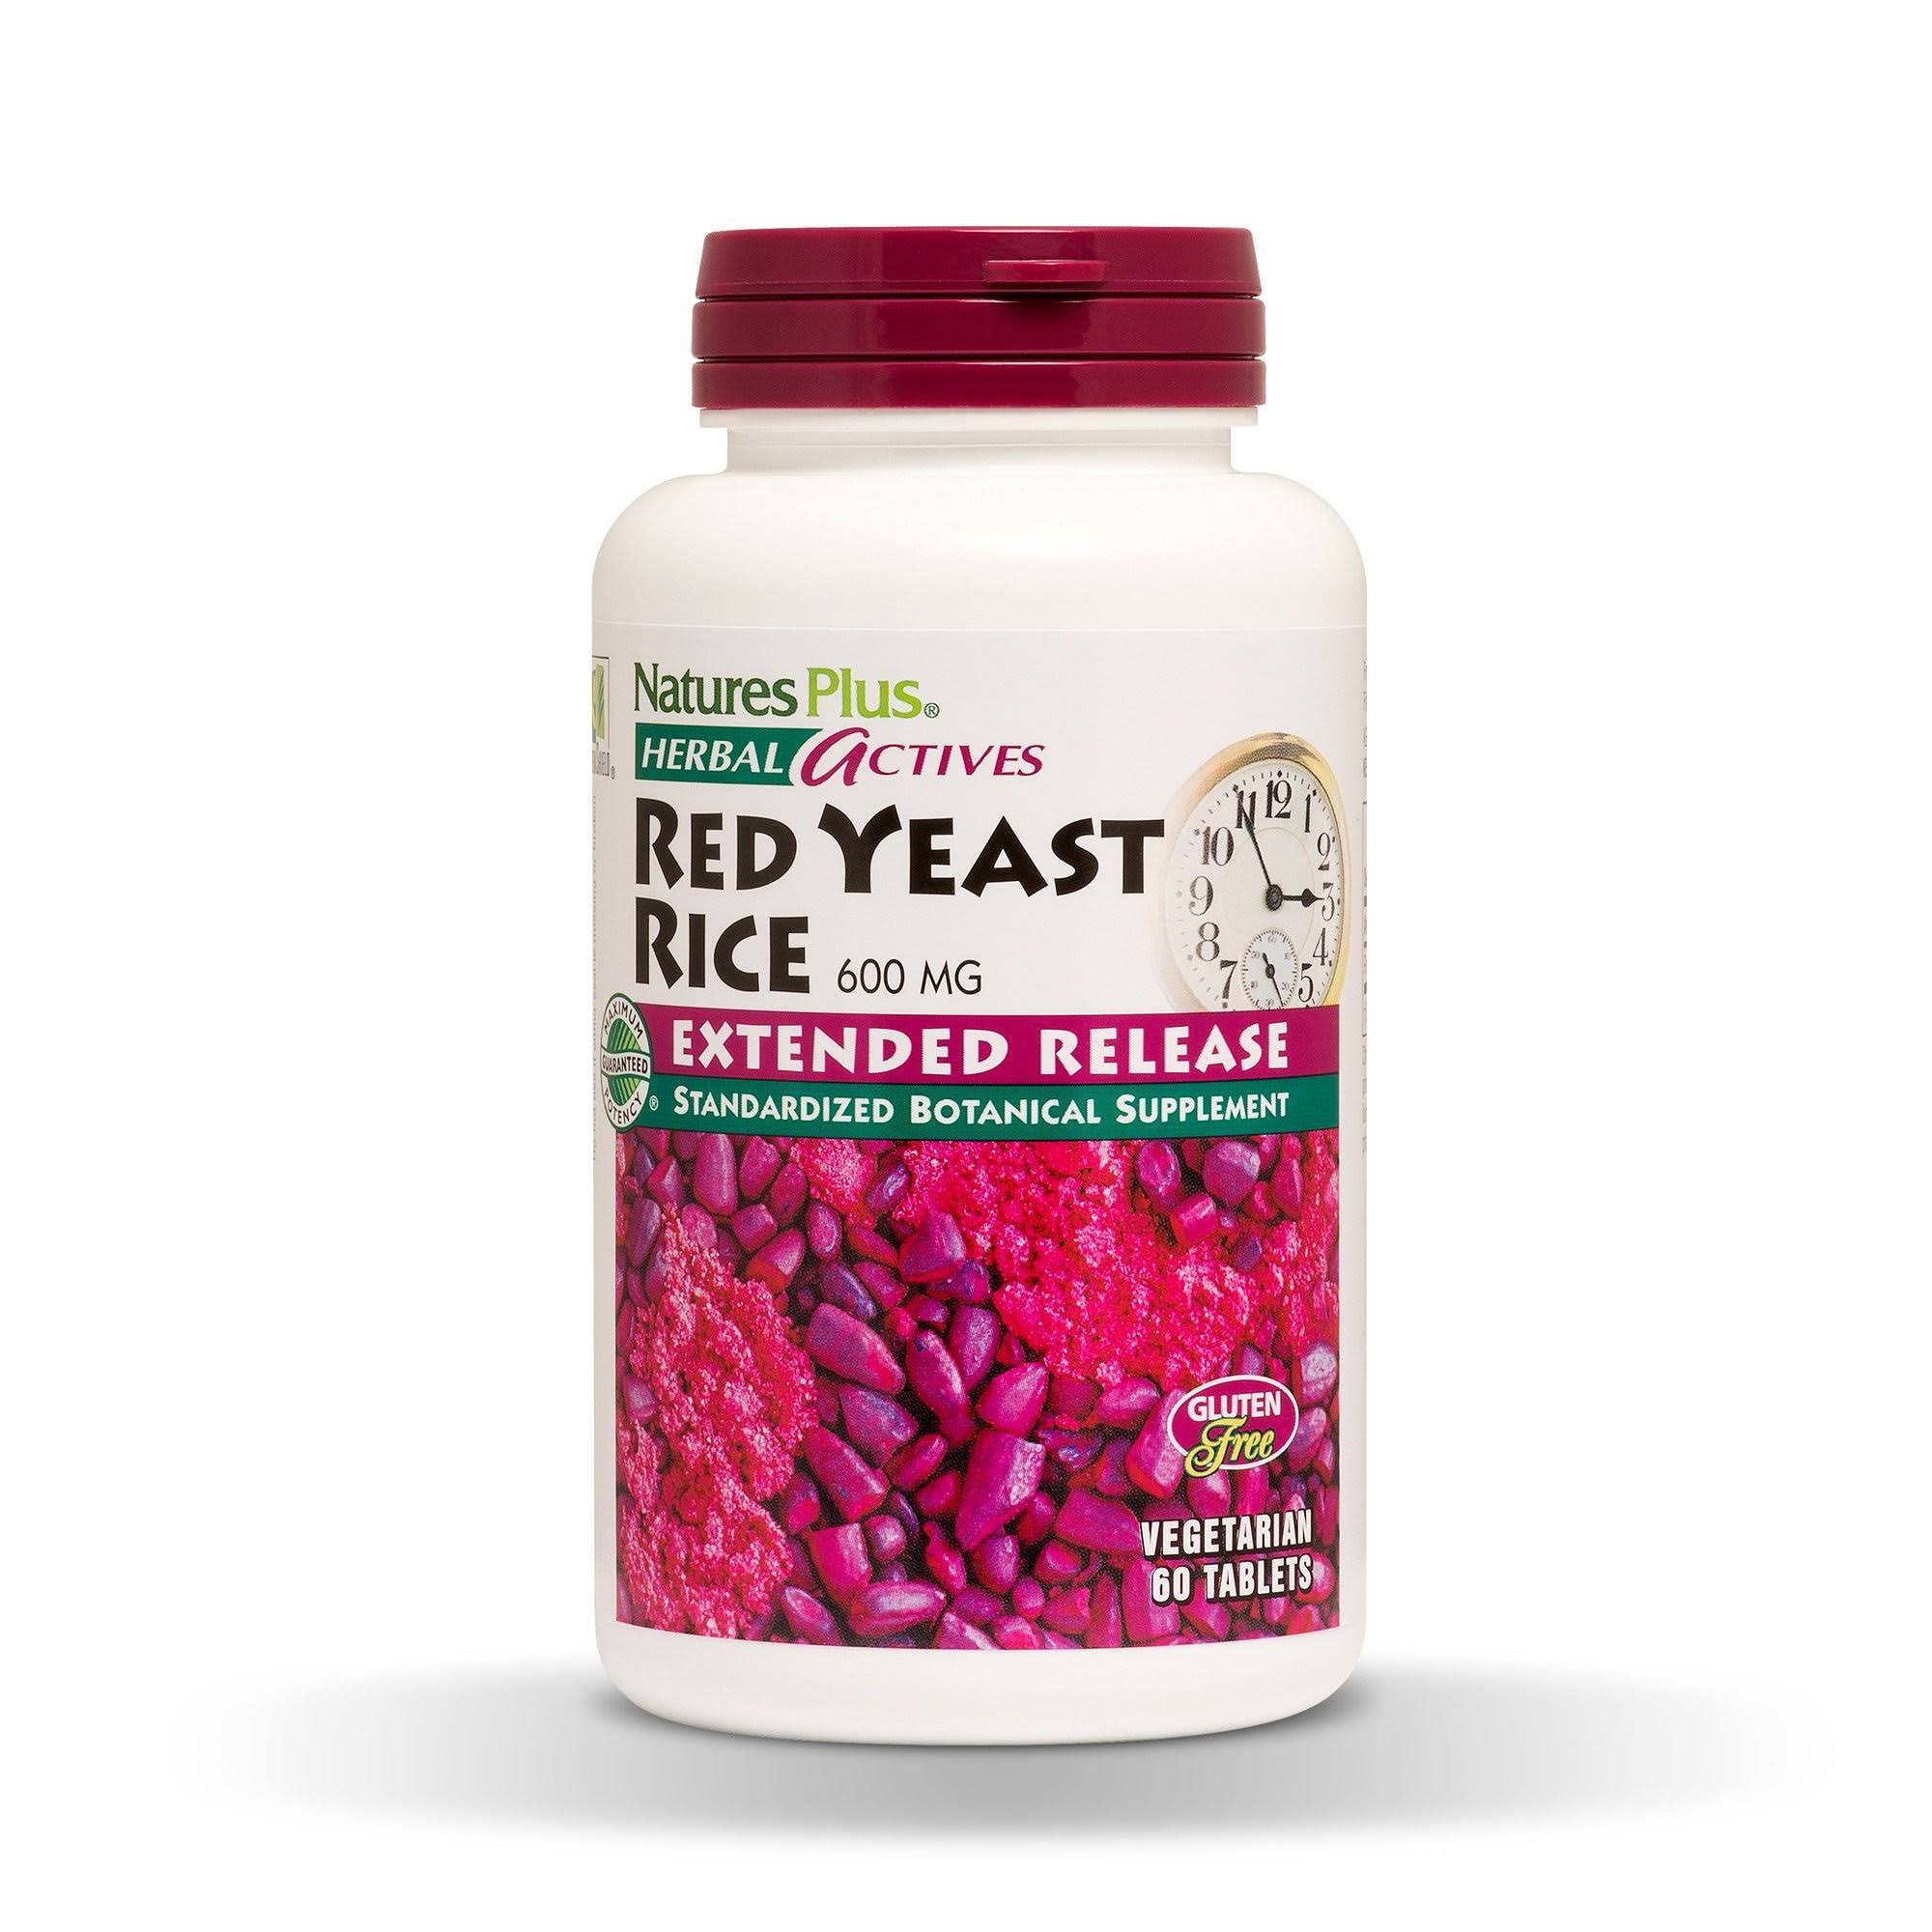 Nature's Plus Red Yeast Rice Nutritional Supplement